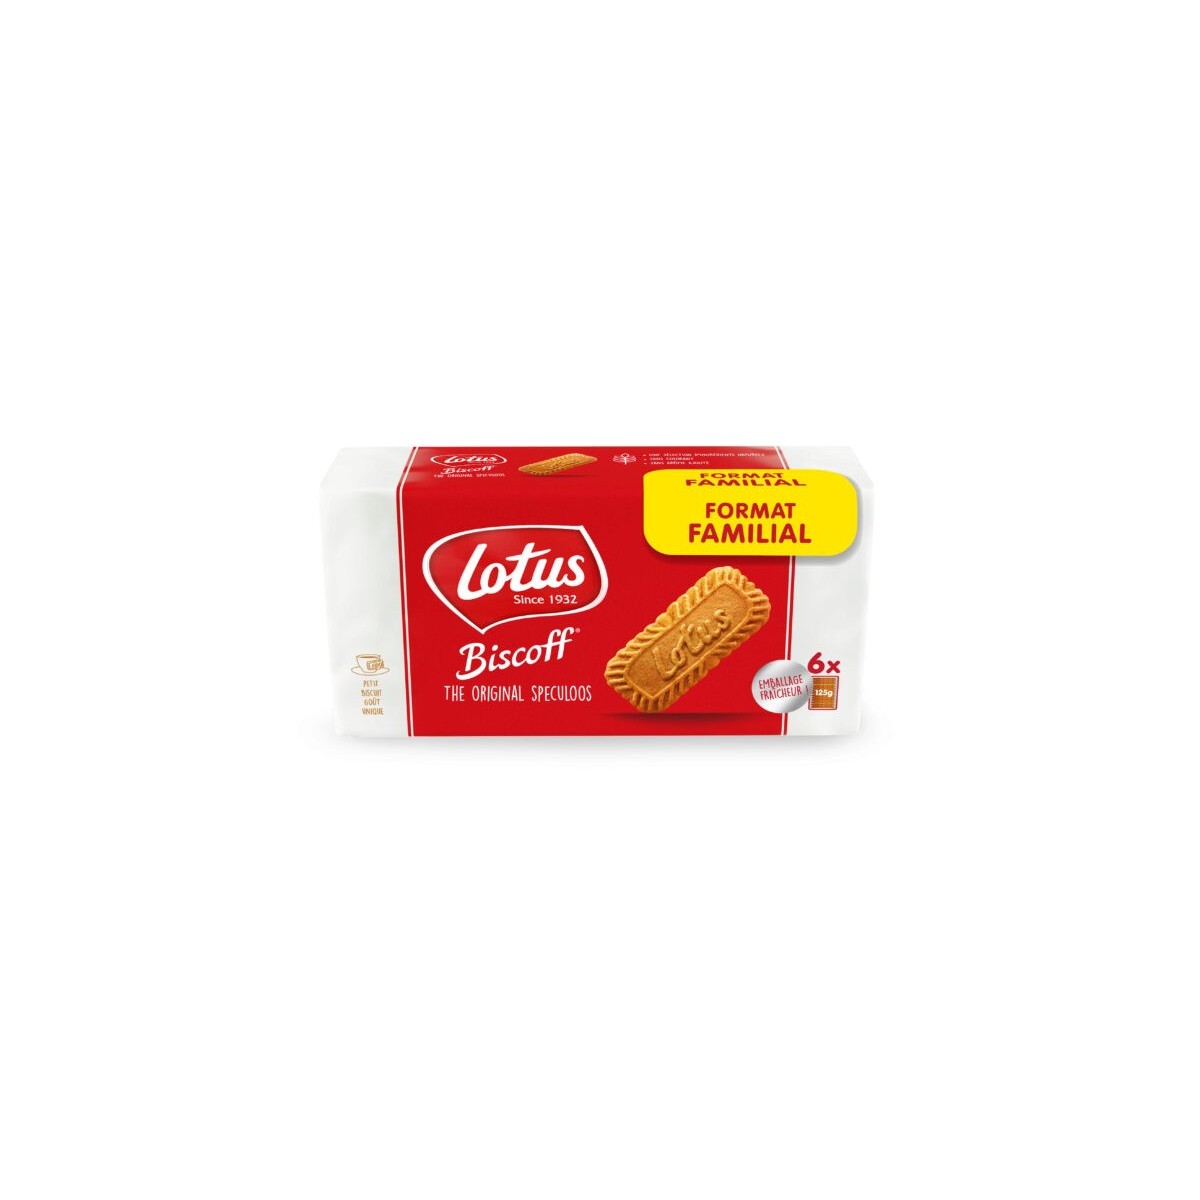 LOTUS SPECULOOS BISCUIT  125GR X 6 FORMAT FAMILIAL